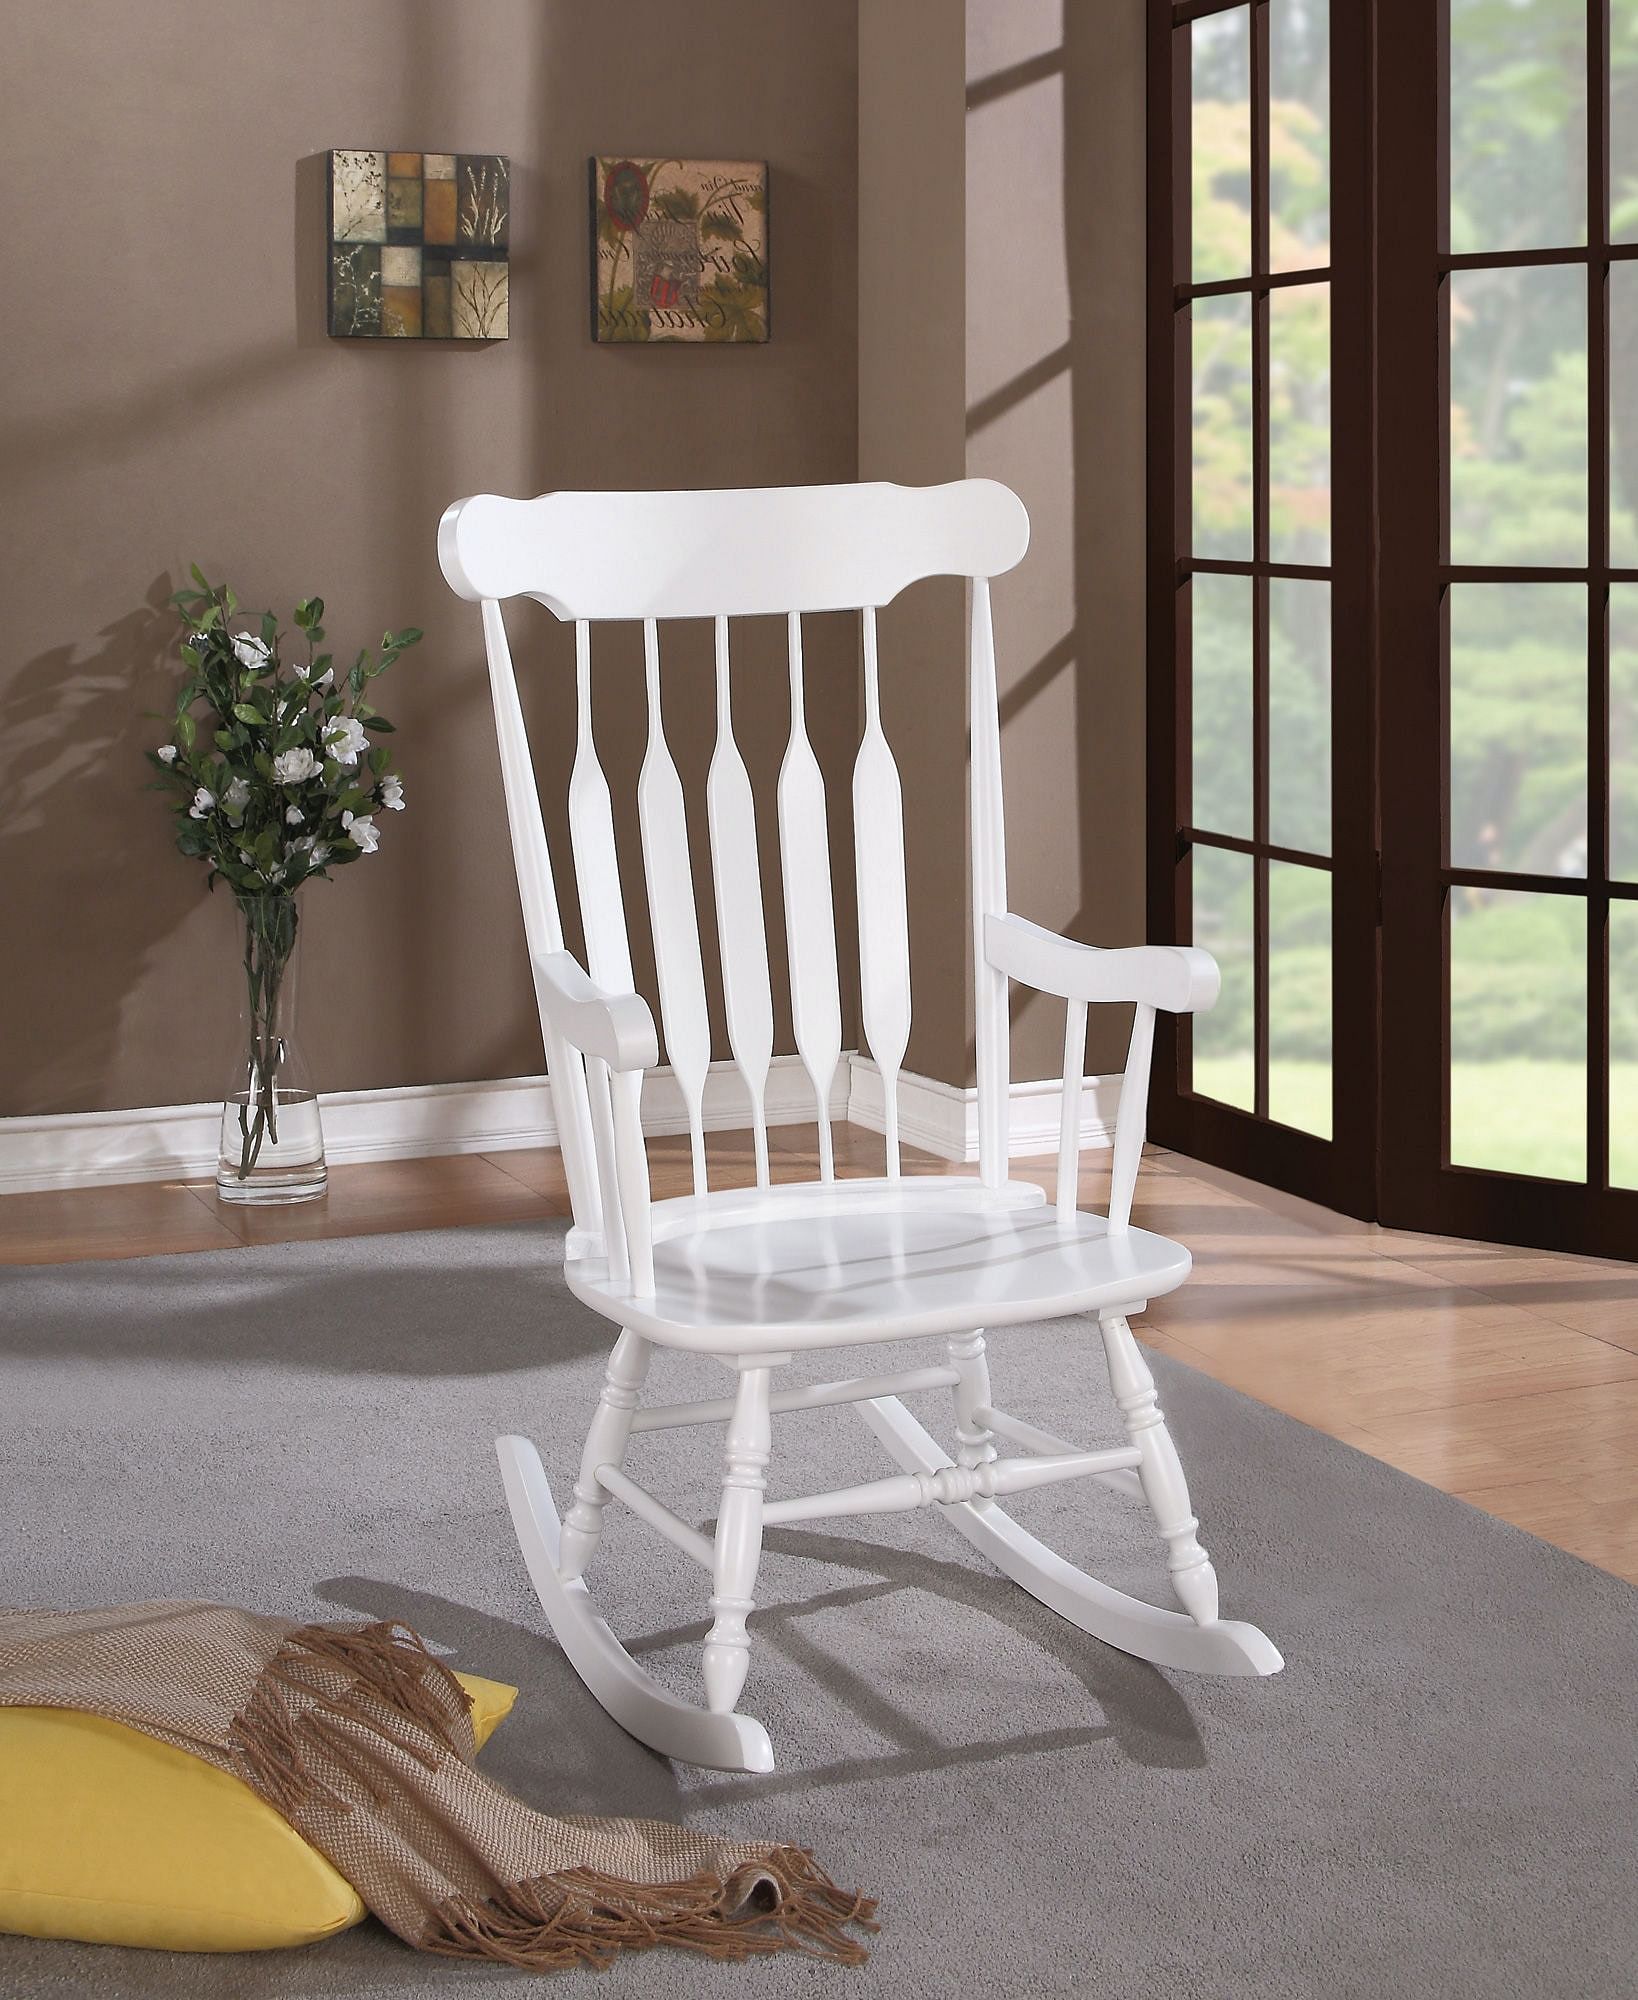 Coaster Living Room Rocking Chair 600174